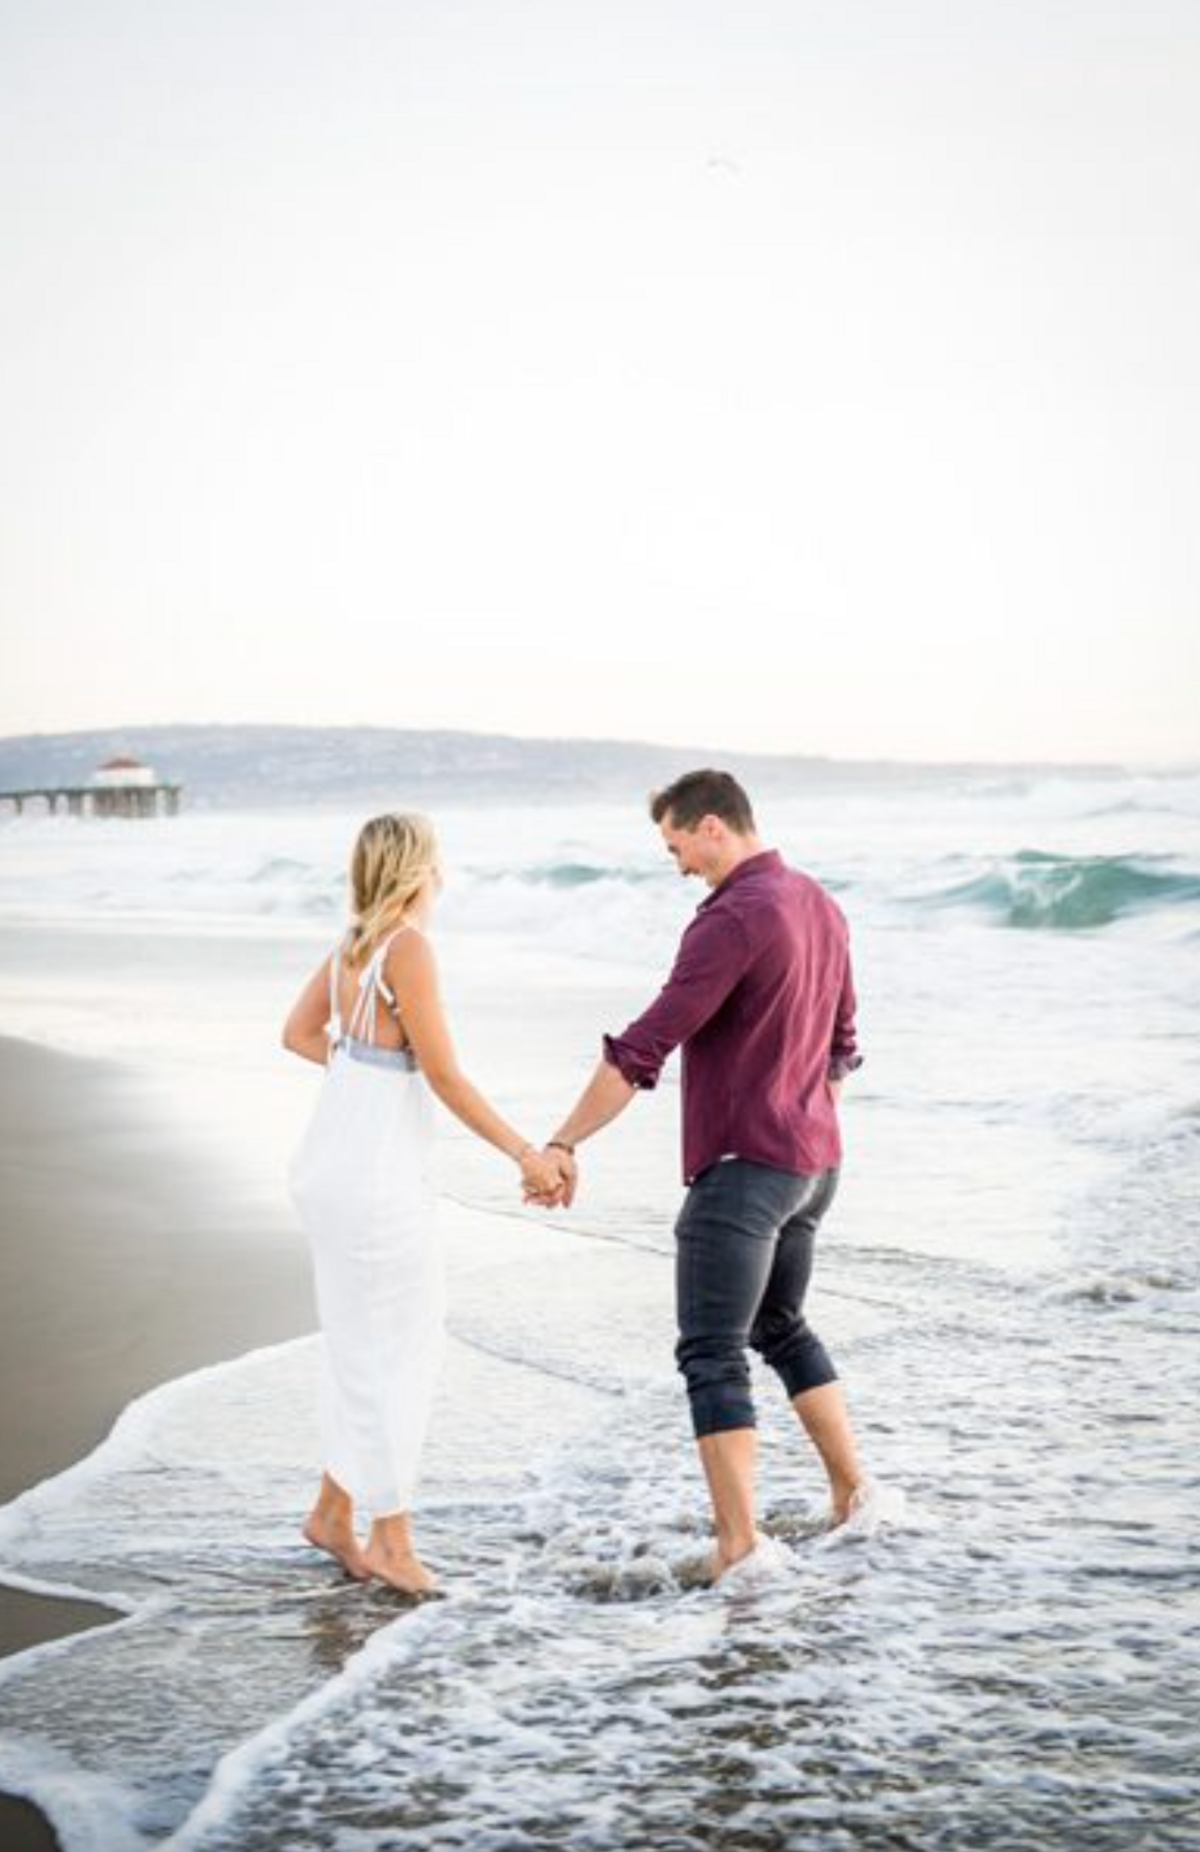 A man and woman face away from the camera, holding hands and playing in the ocean for their engagement session.